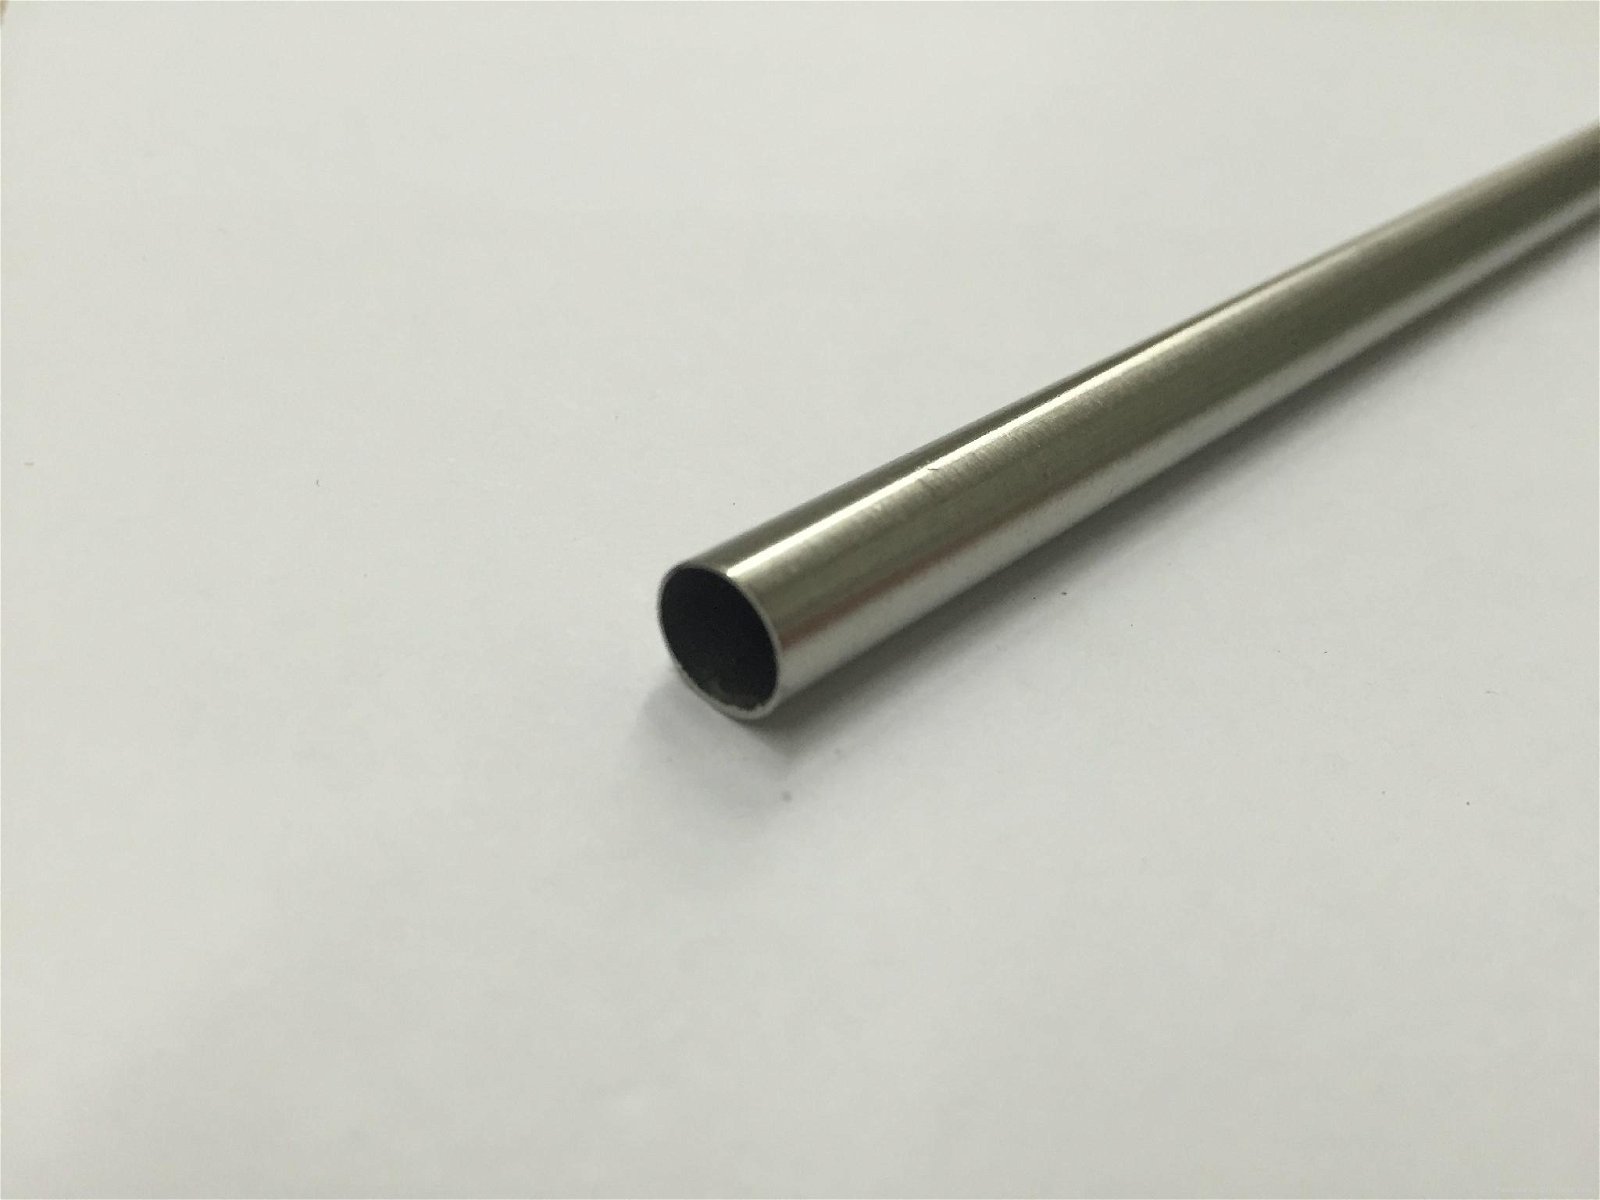 Alibaba wounderful pipe supplier 316L tubos 1.5mm*0.2mm pipes